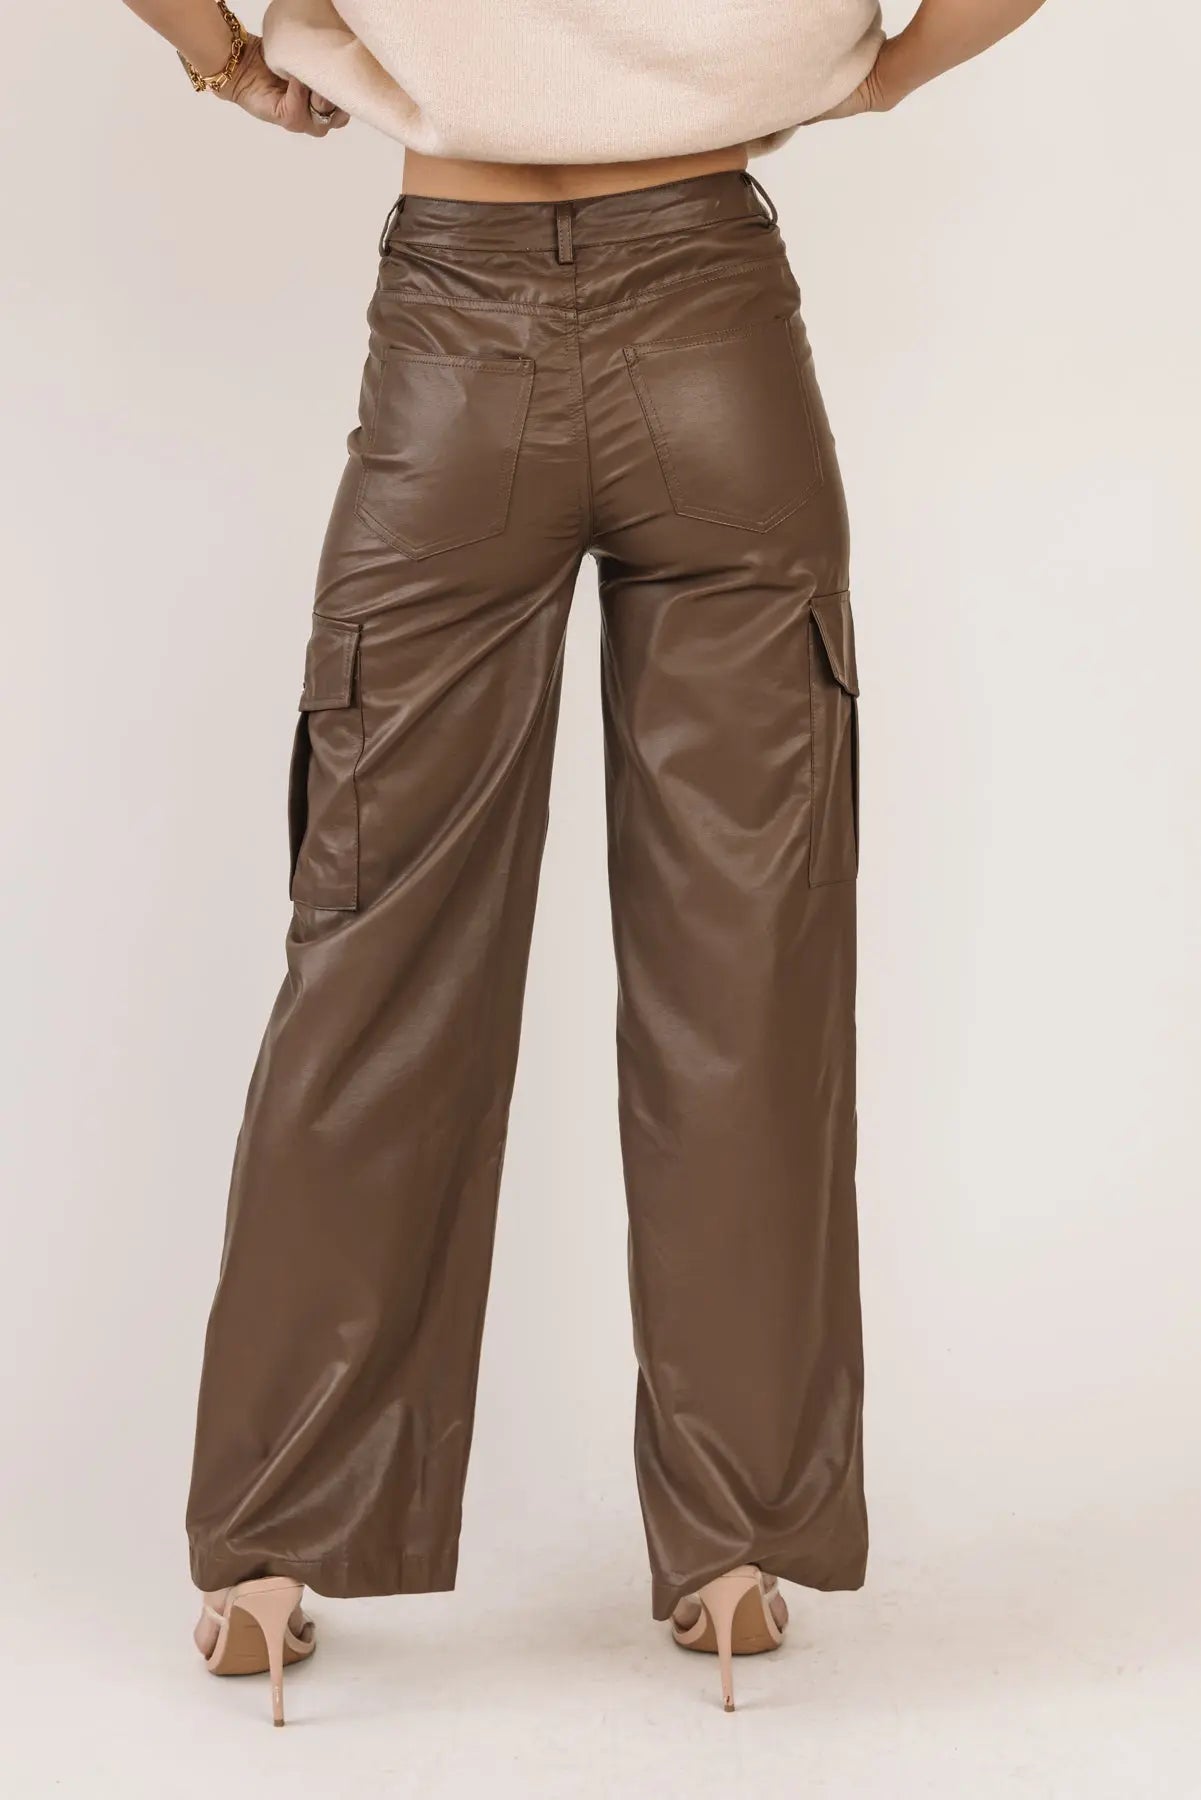 Women's Petite Leather Look Belted Straight Trousers | Boohoo UK